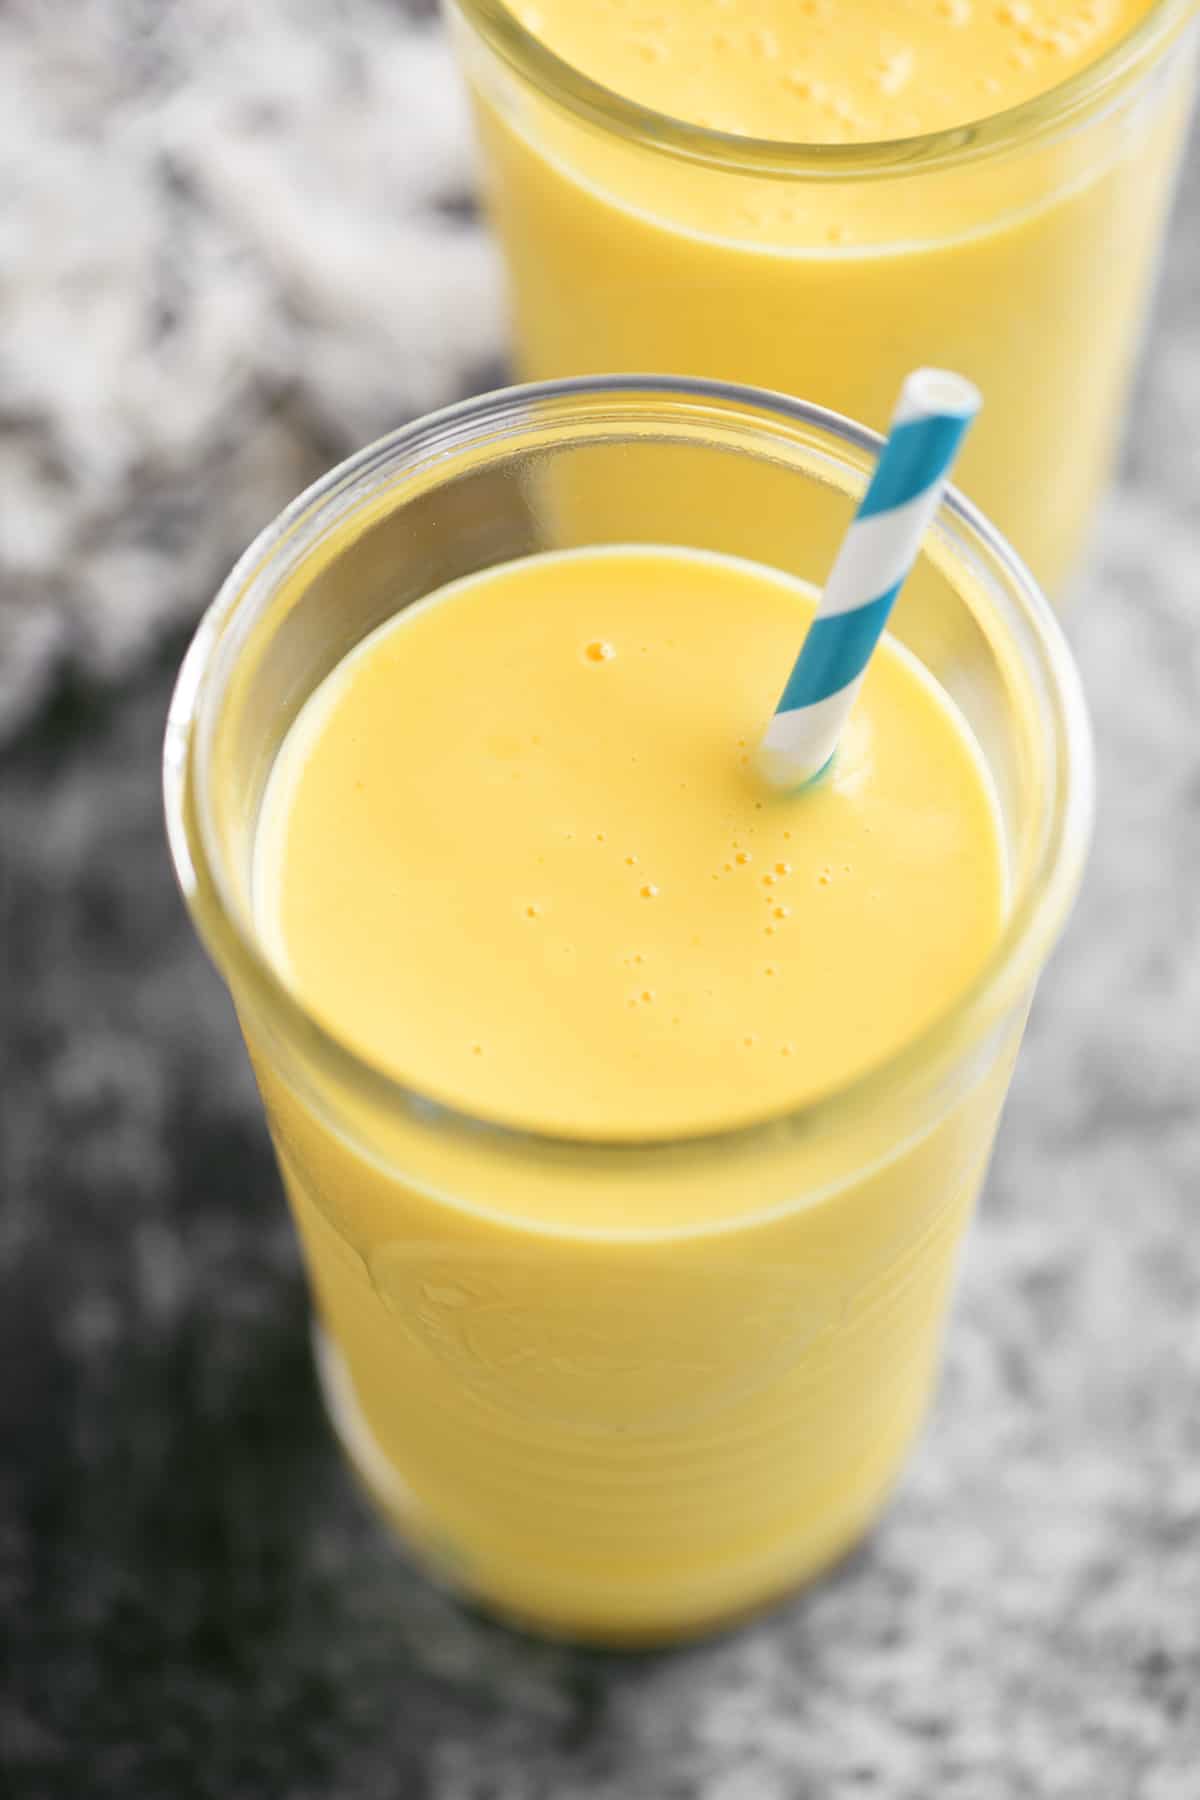 a mango smoothie with a blue and white straw